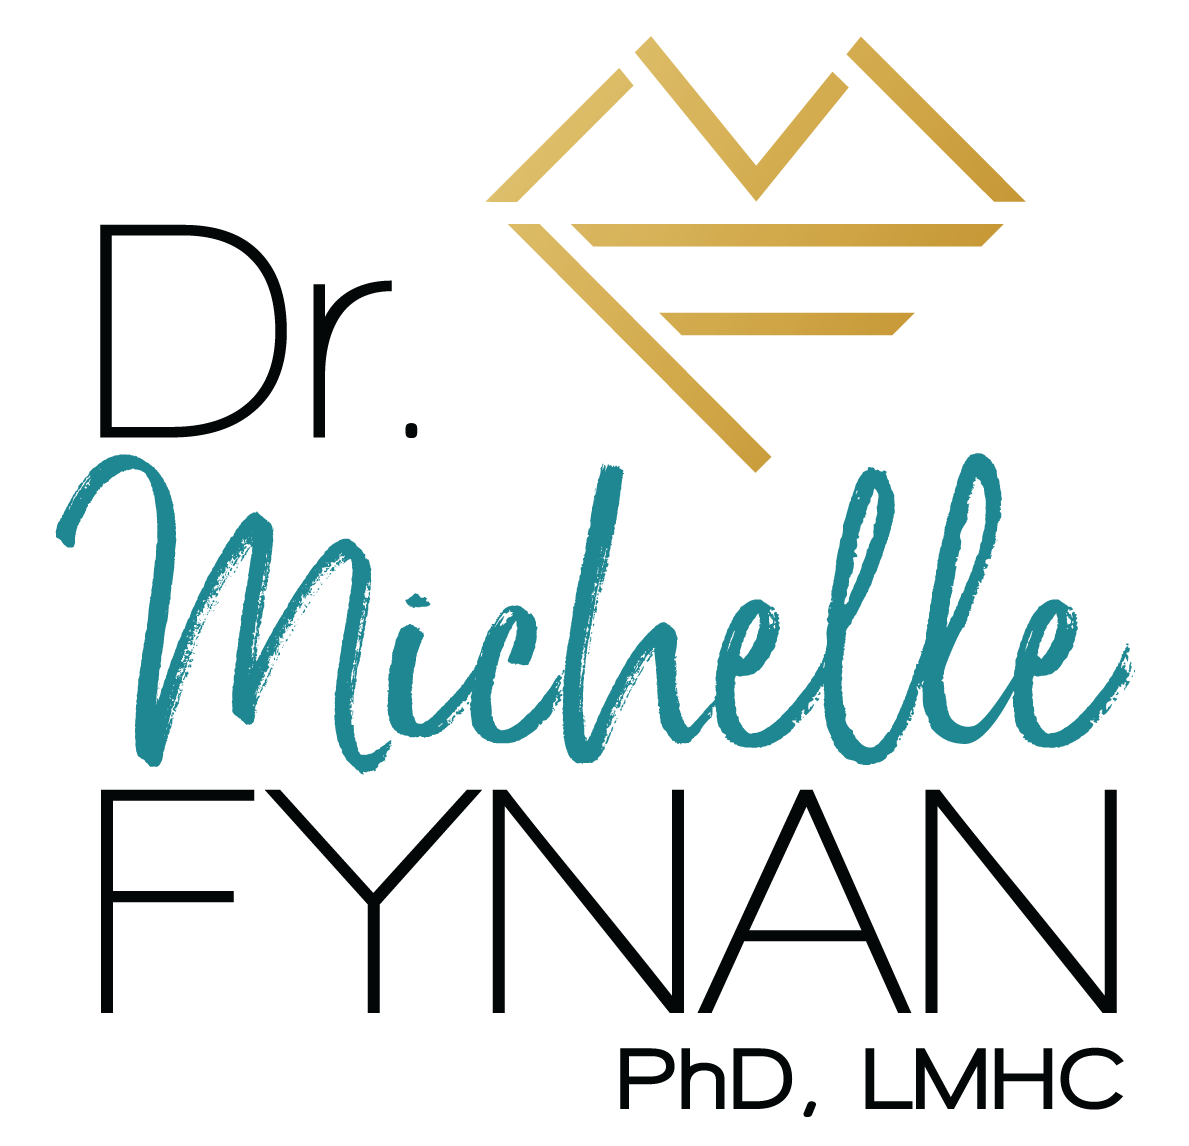 Dr. Michelle Fynan, PhD, LMHC – Counselor and Sex Therapist in Florida Logo